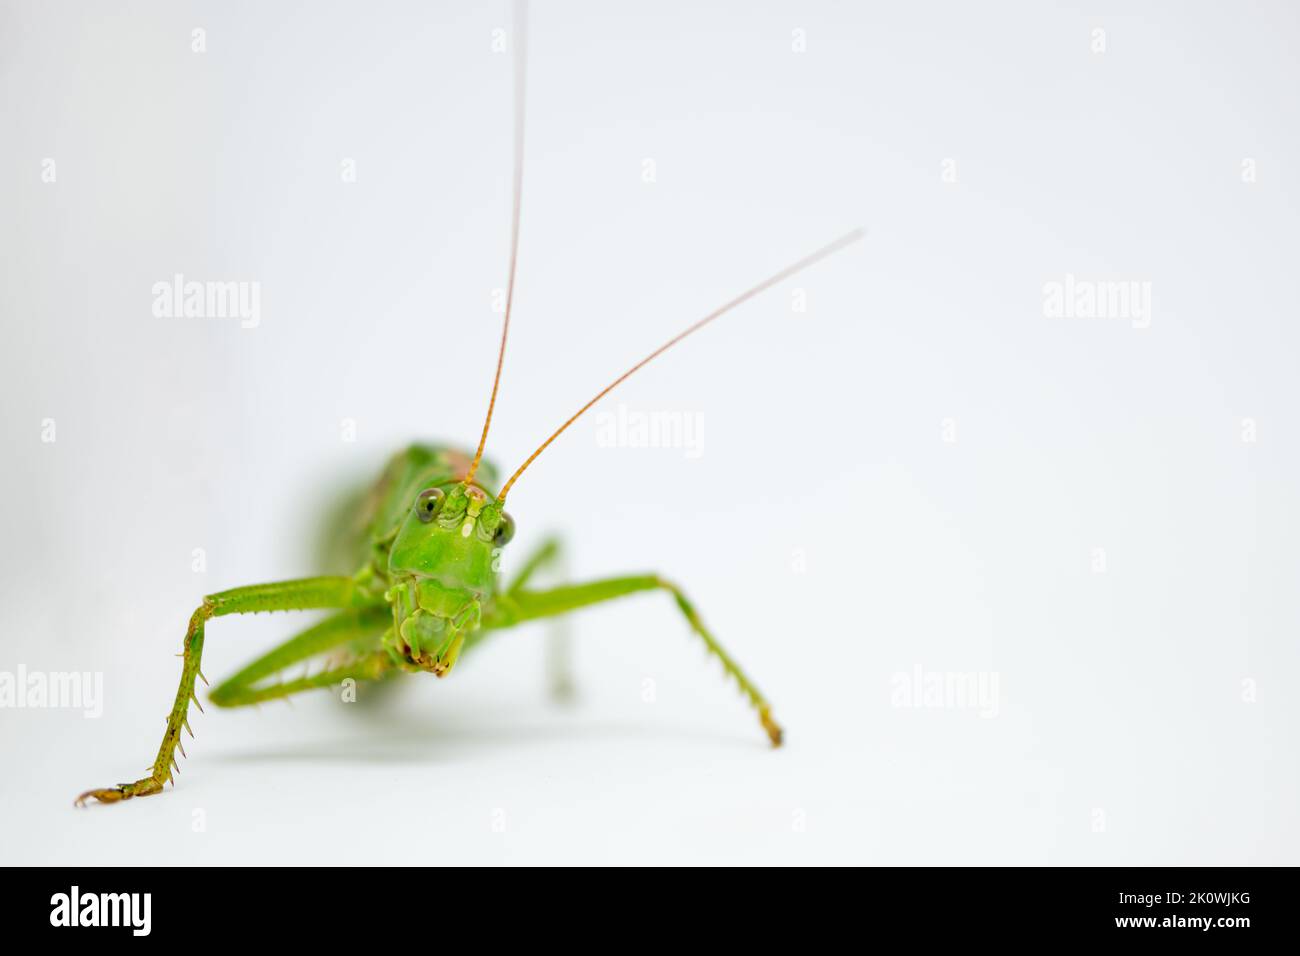 Detail of Great green bush cricket Katydid or Long-Horned Grasshopper head with tentacles. Scientific  Tettigonia viridissima. White background. Stock Photo